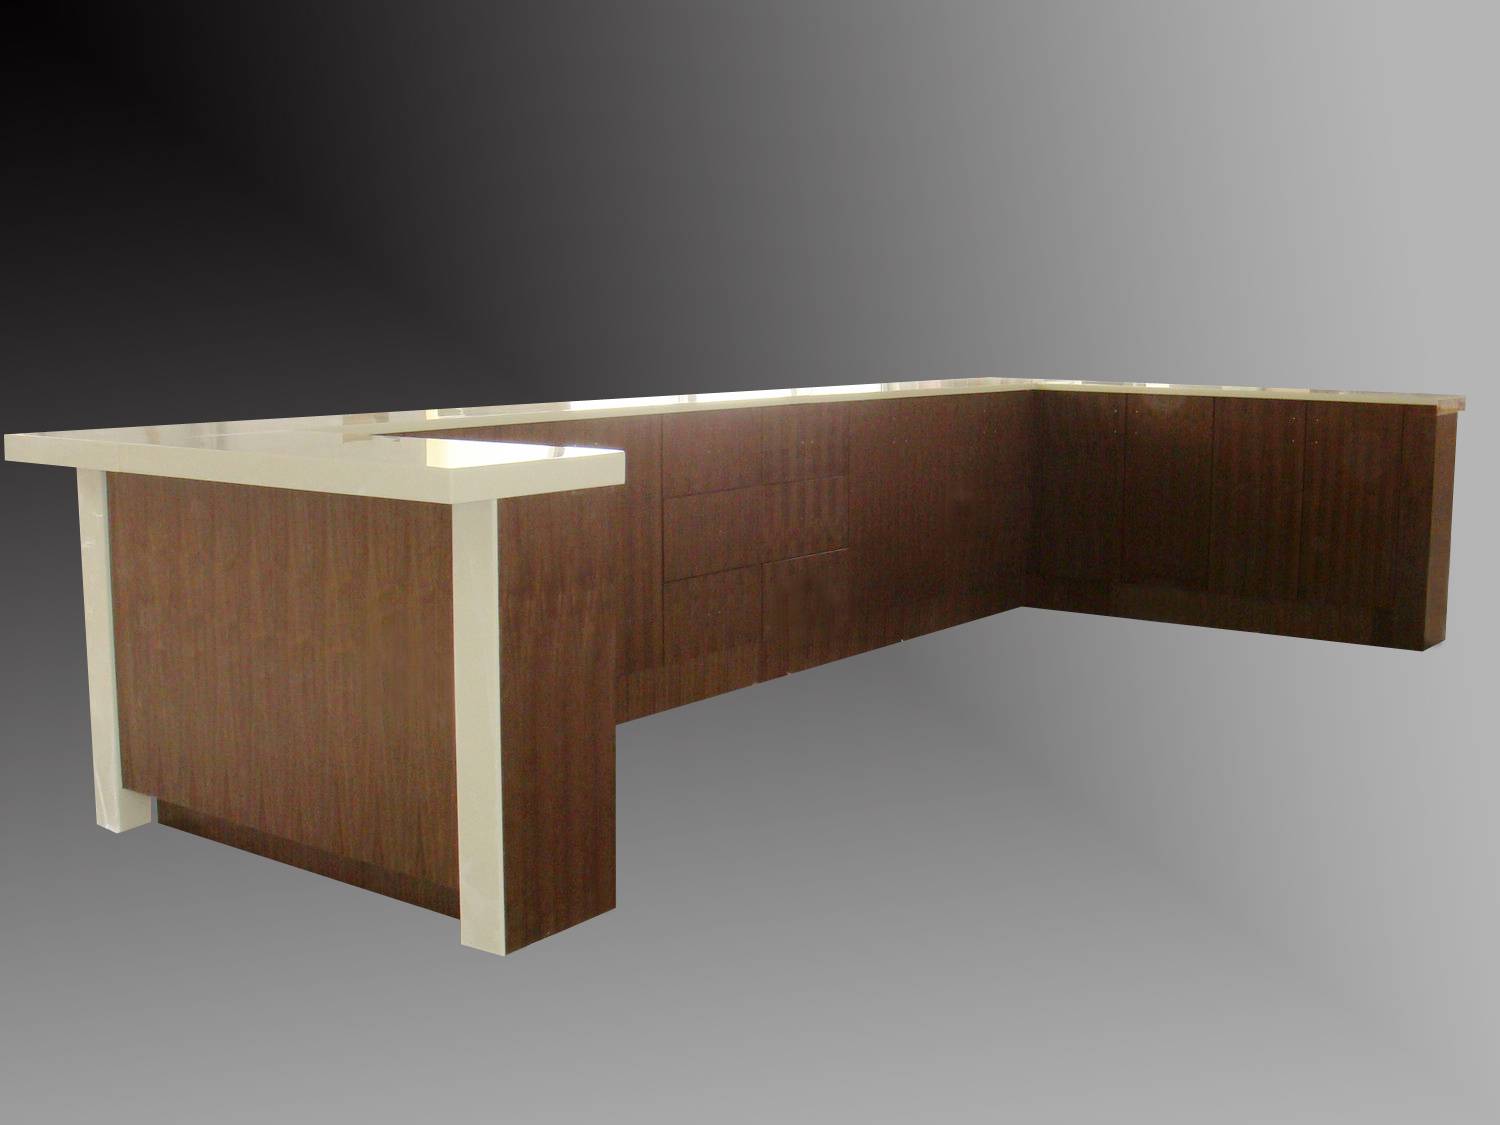 Wooden Bar Counter Design Furniture Manufacturers From Qingdao